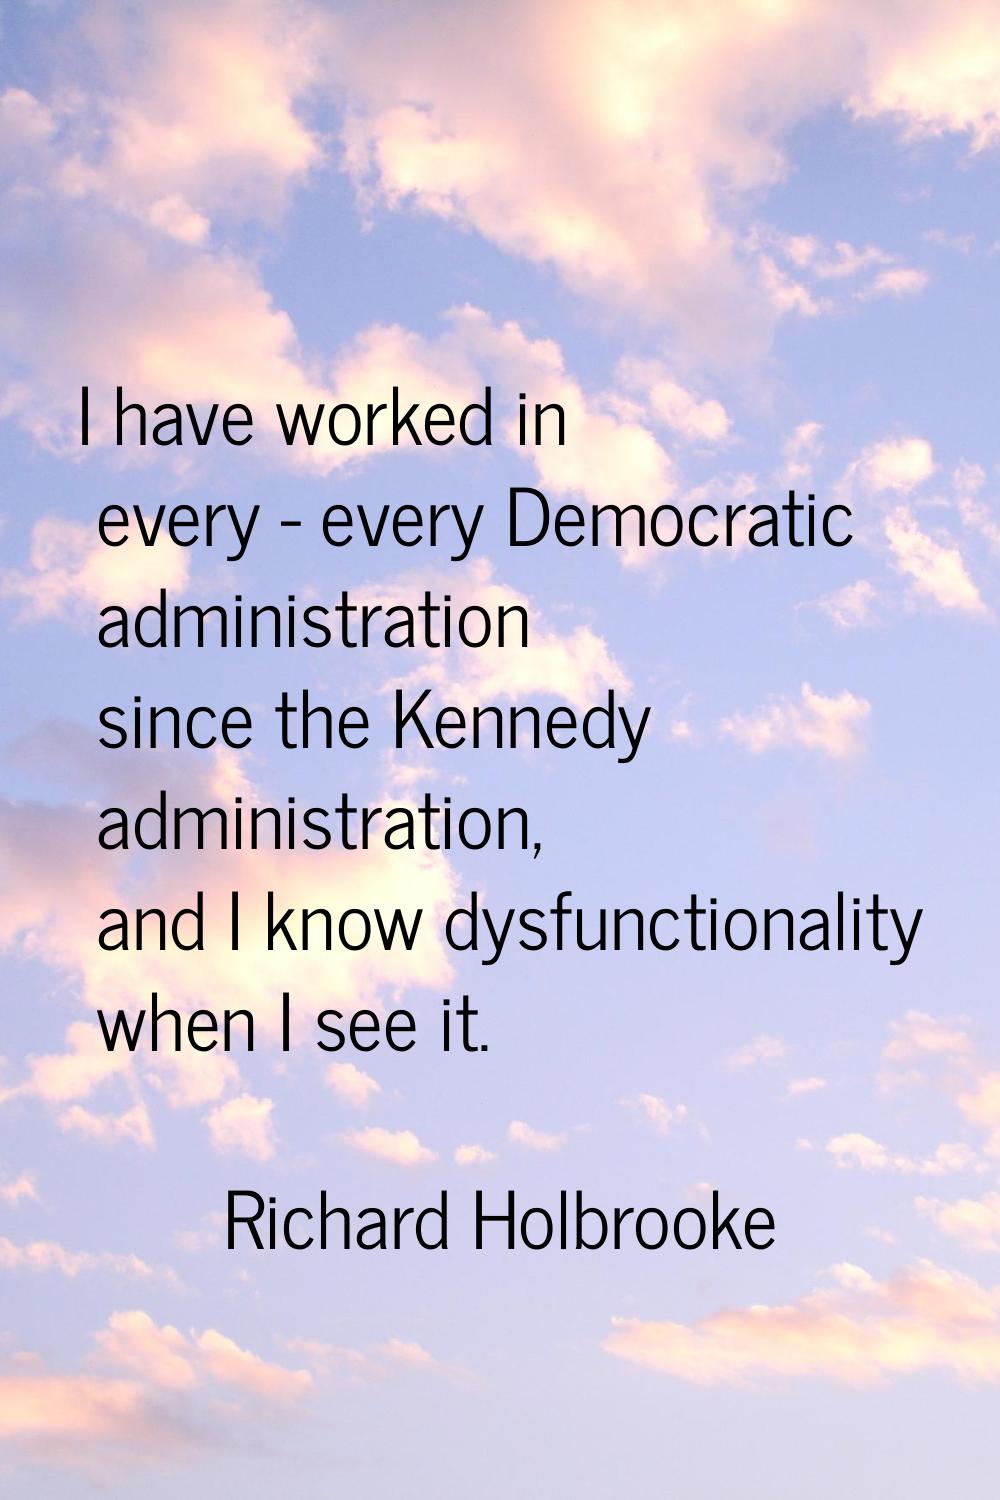 I have worked in every - every Democratic administration since the Kennedy administration, and I kn